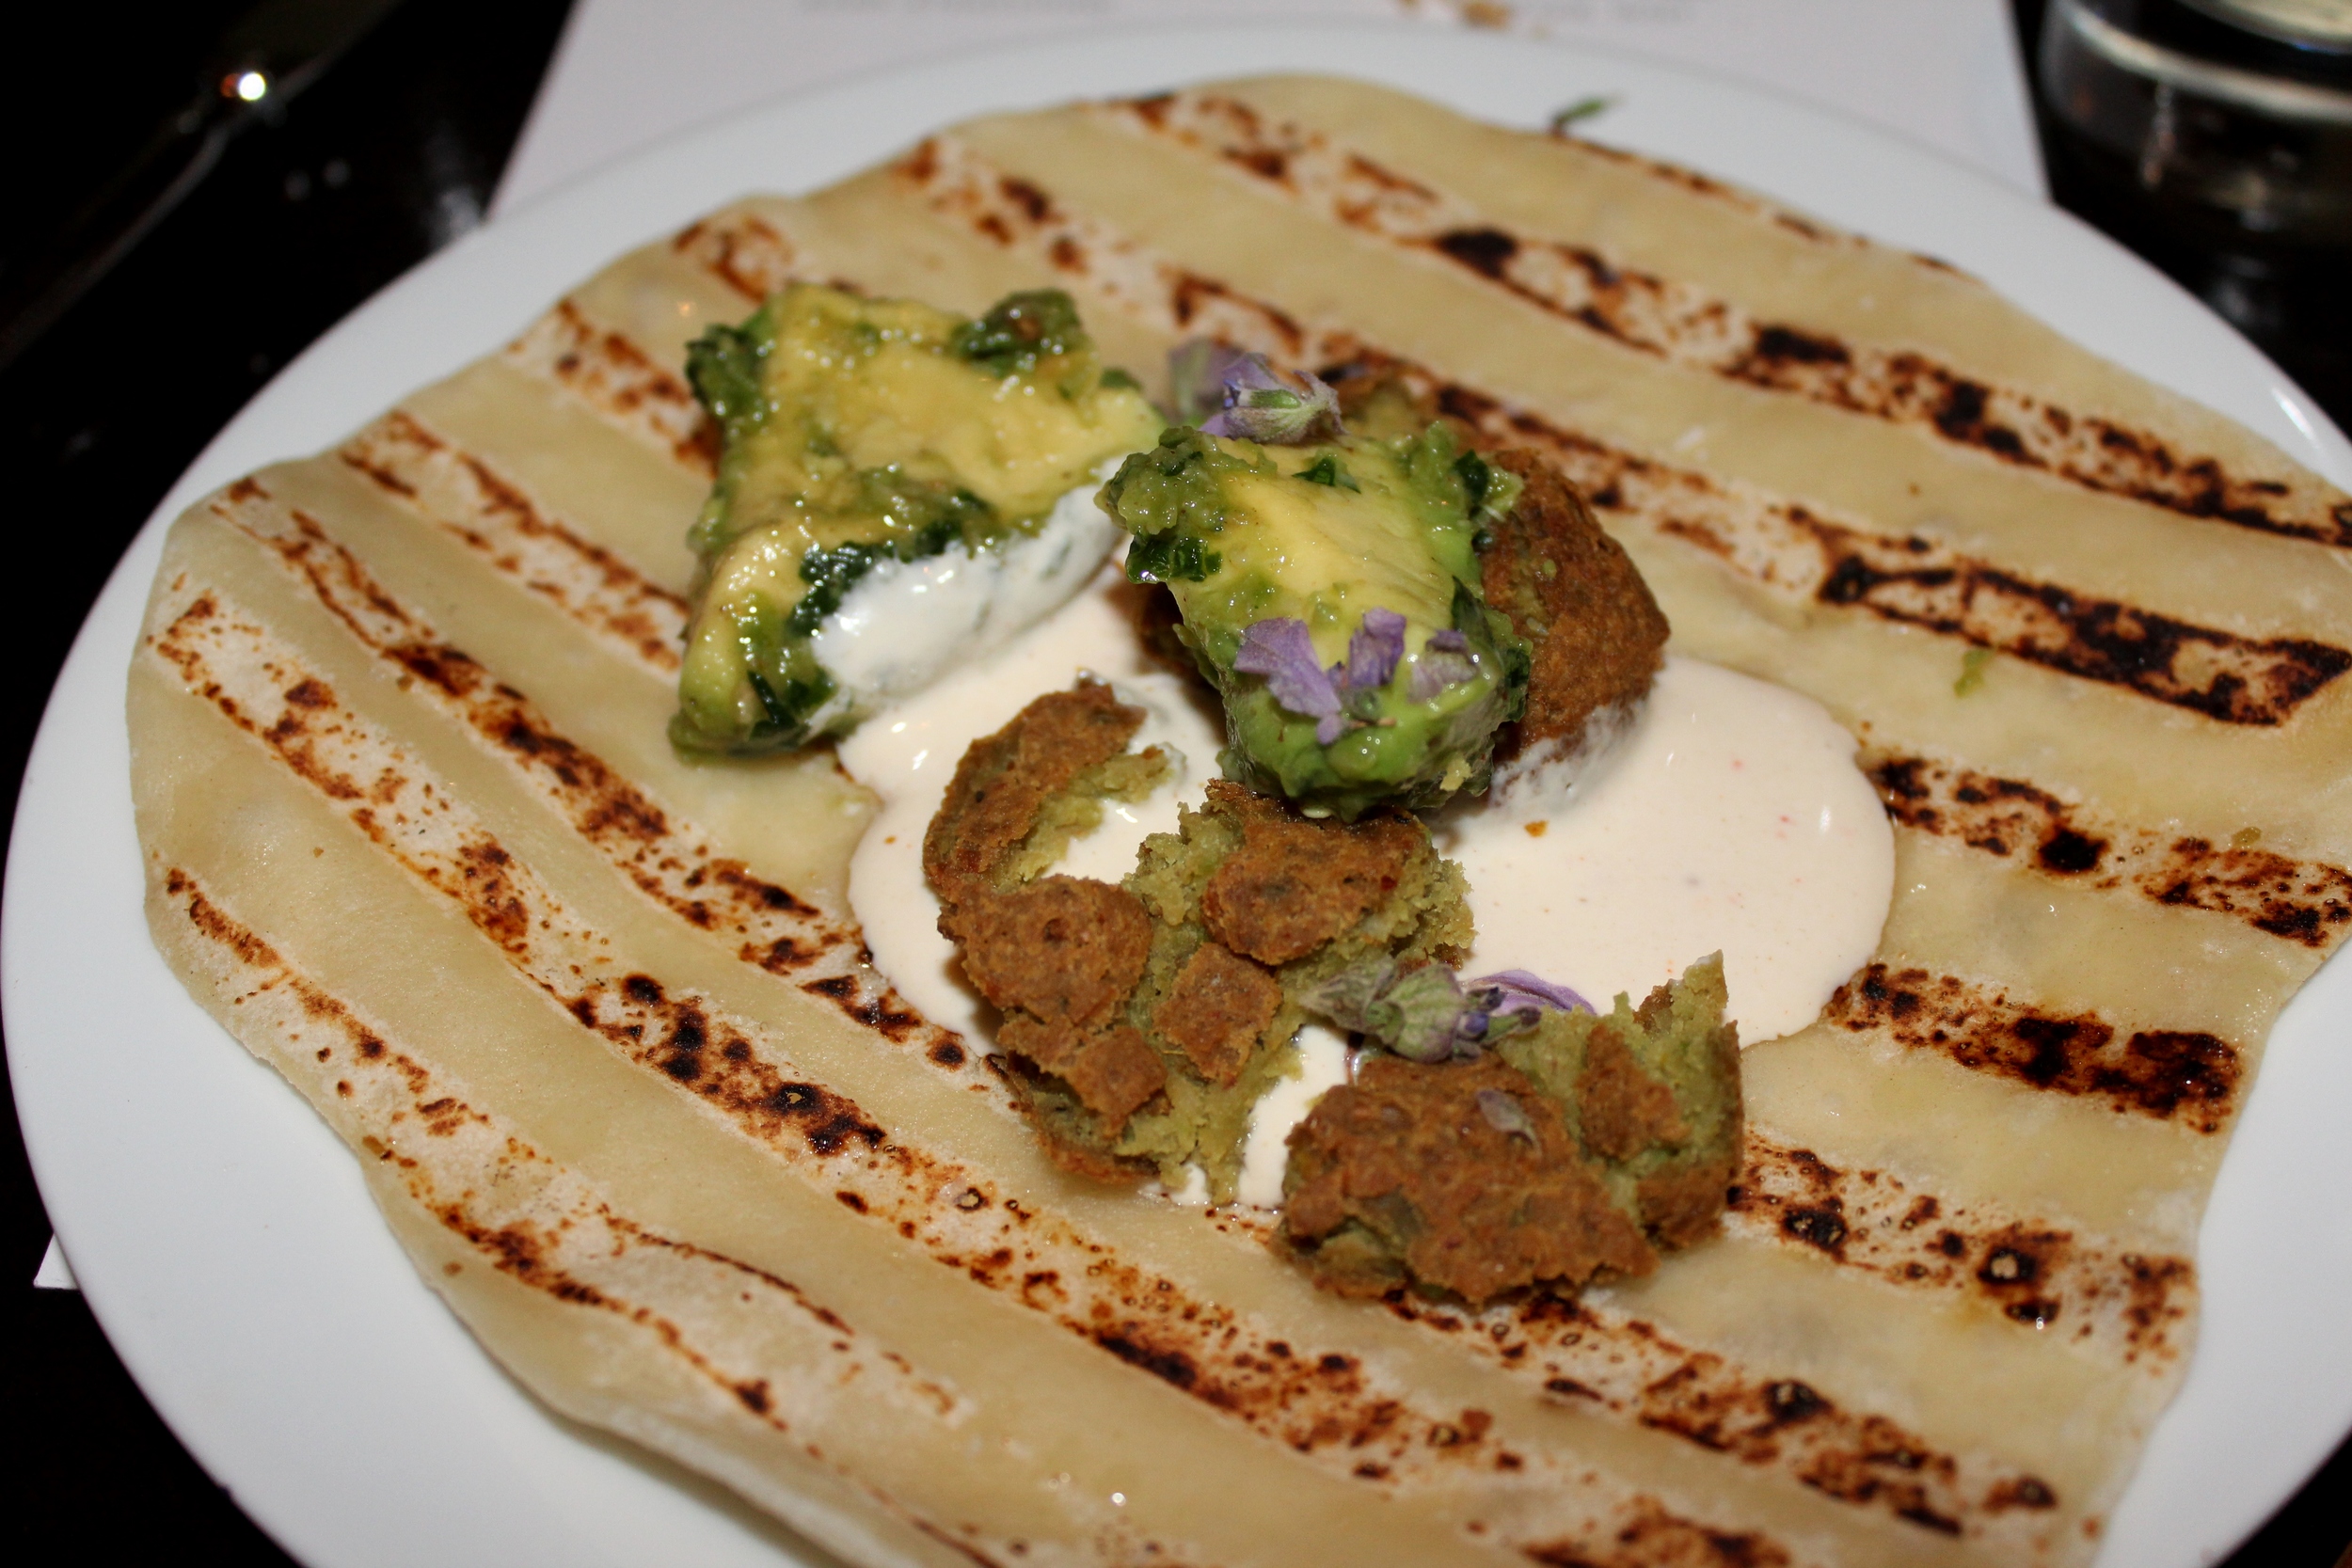 Fava bean falafel with labneh, avocado, and spicy Yemenite schug